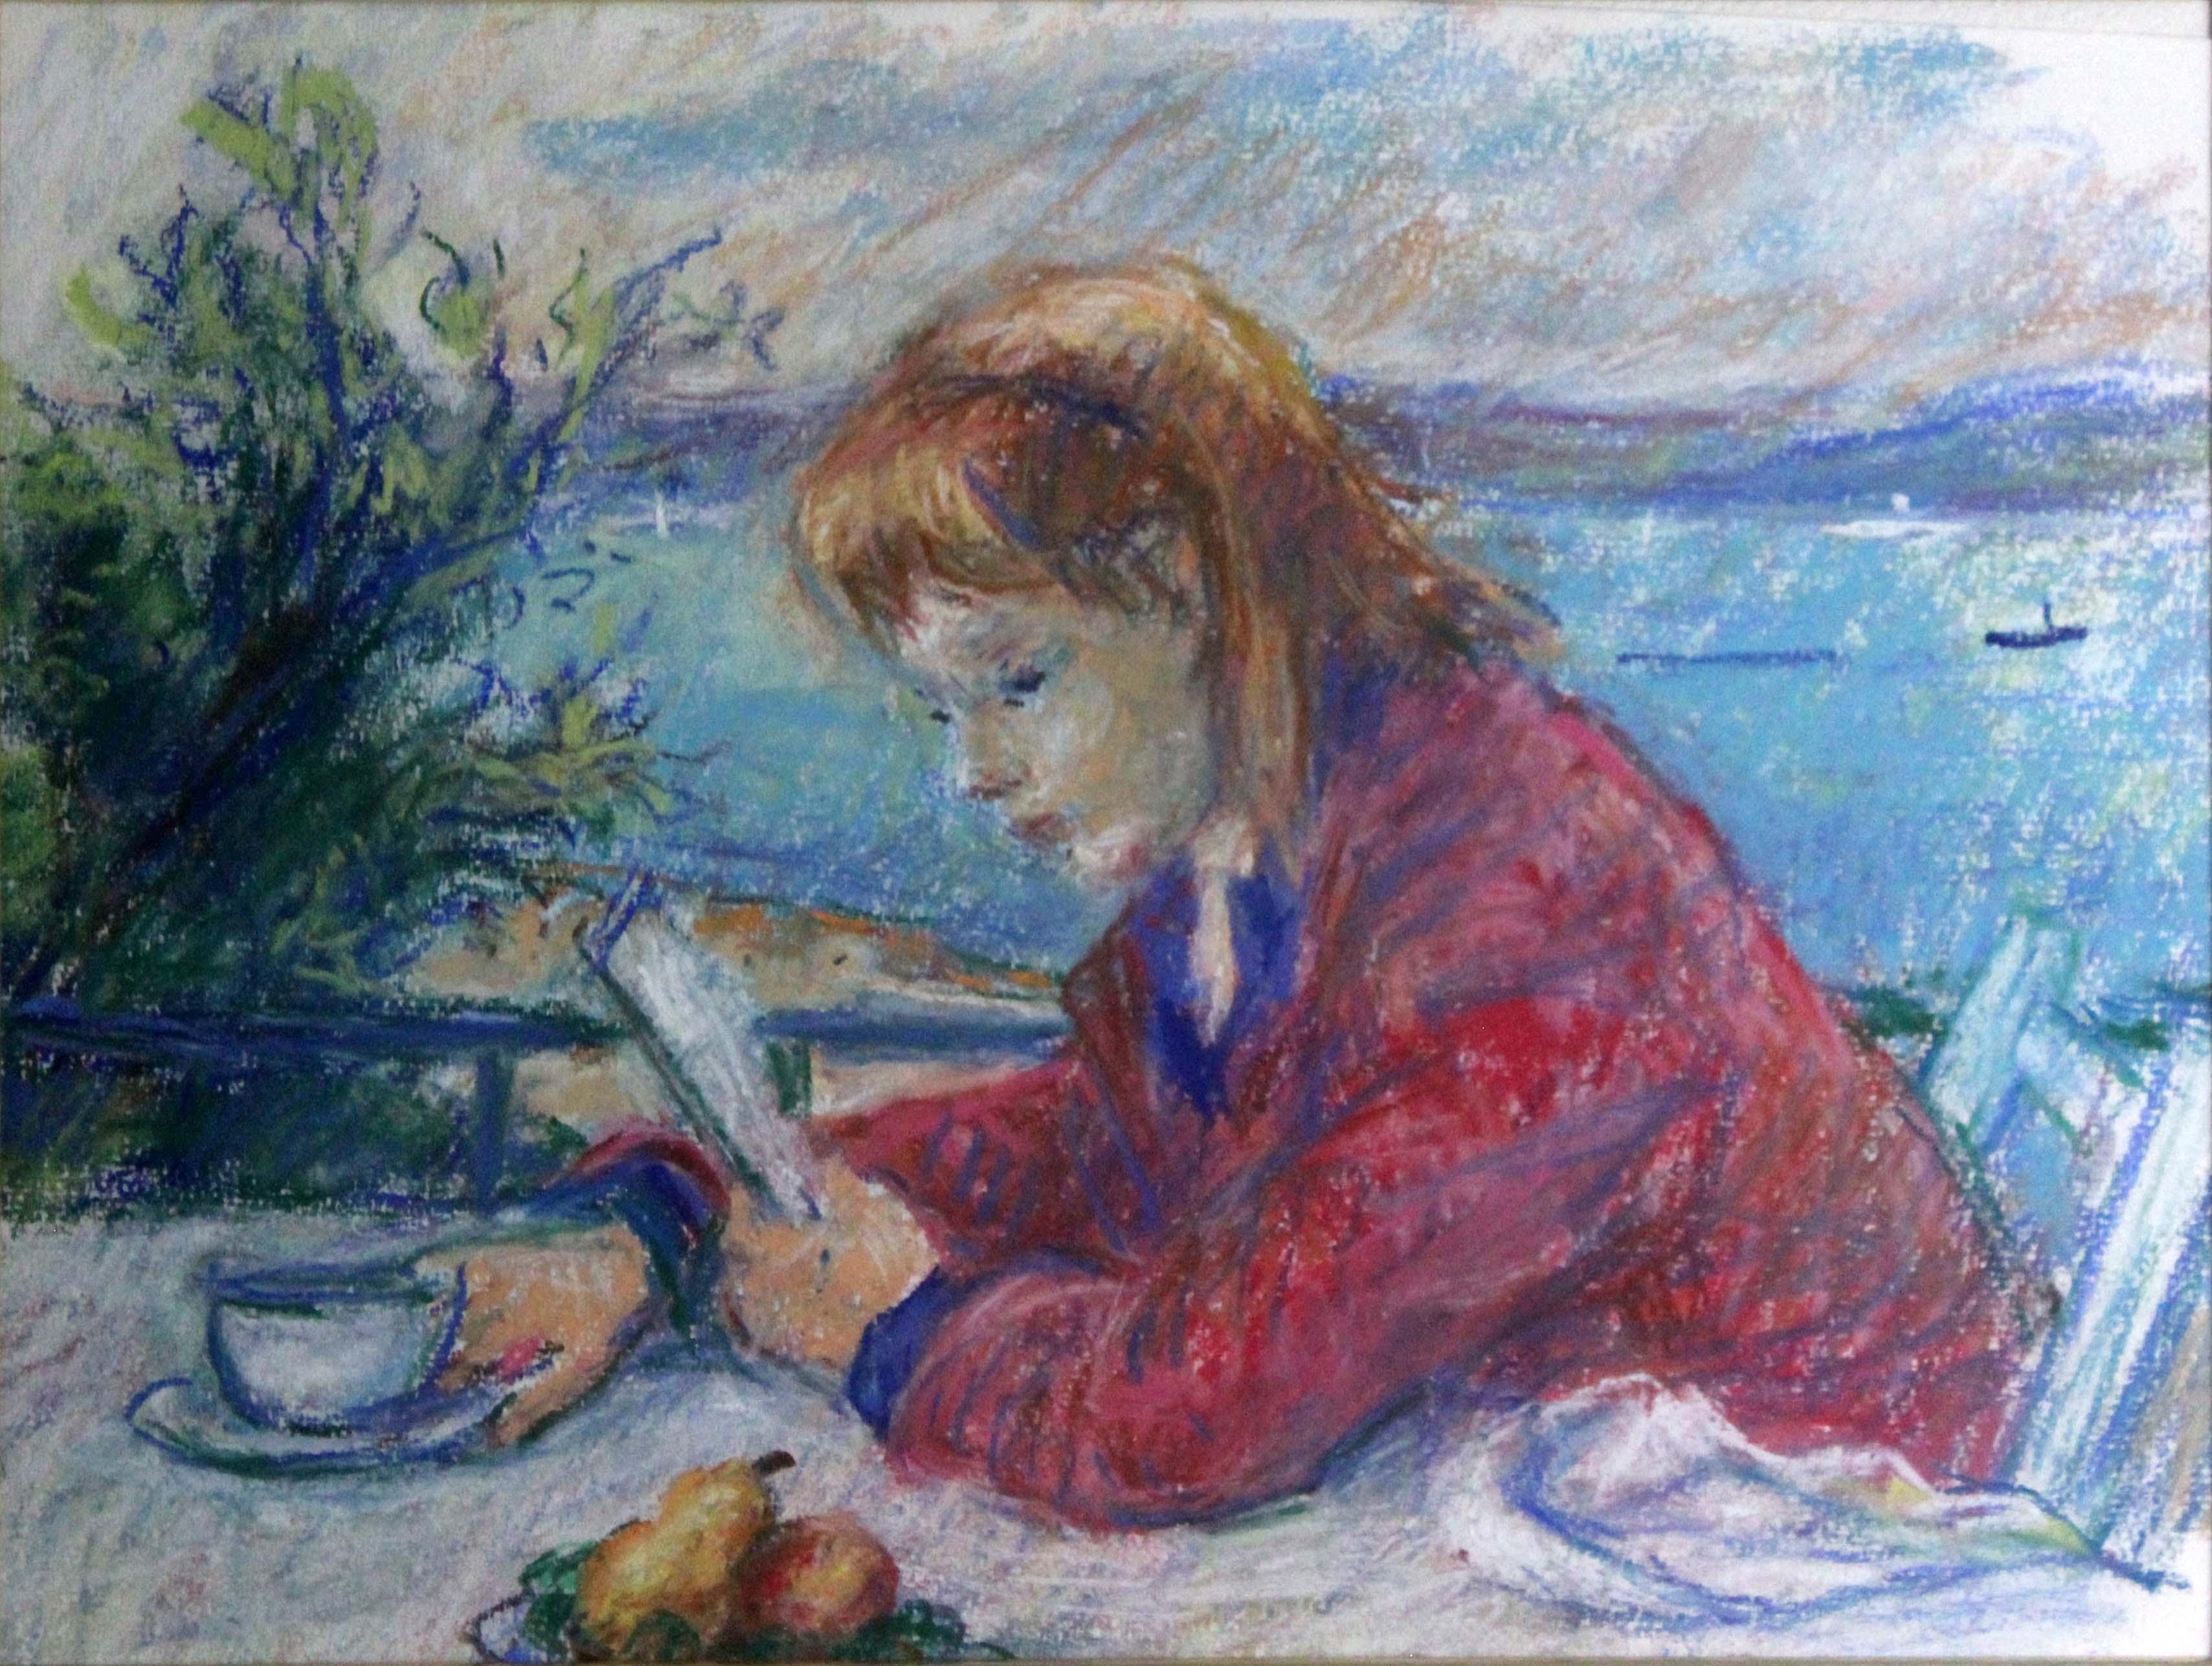 A lovely unique one-of-a-kind pastel on paper titled The Letter by Robert Philipp. A wonderful example of the artist's signature impressionistic style. The woman is seen reading a letter while drinking a cup of tea with gorgeous views of the water.